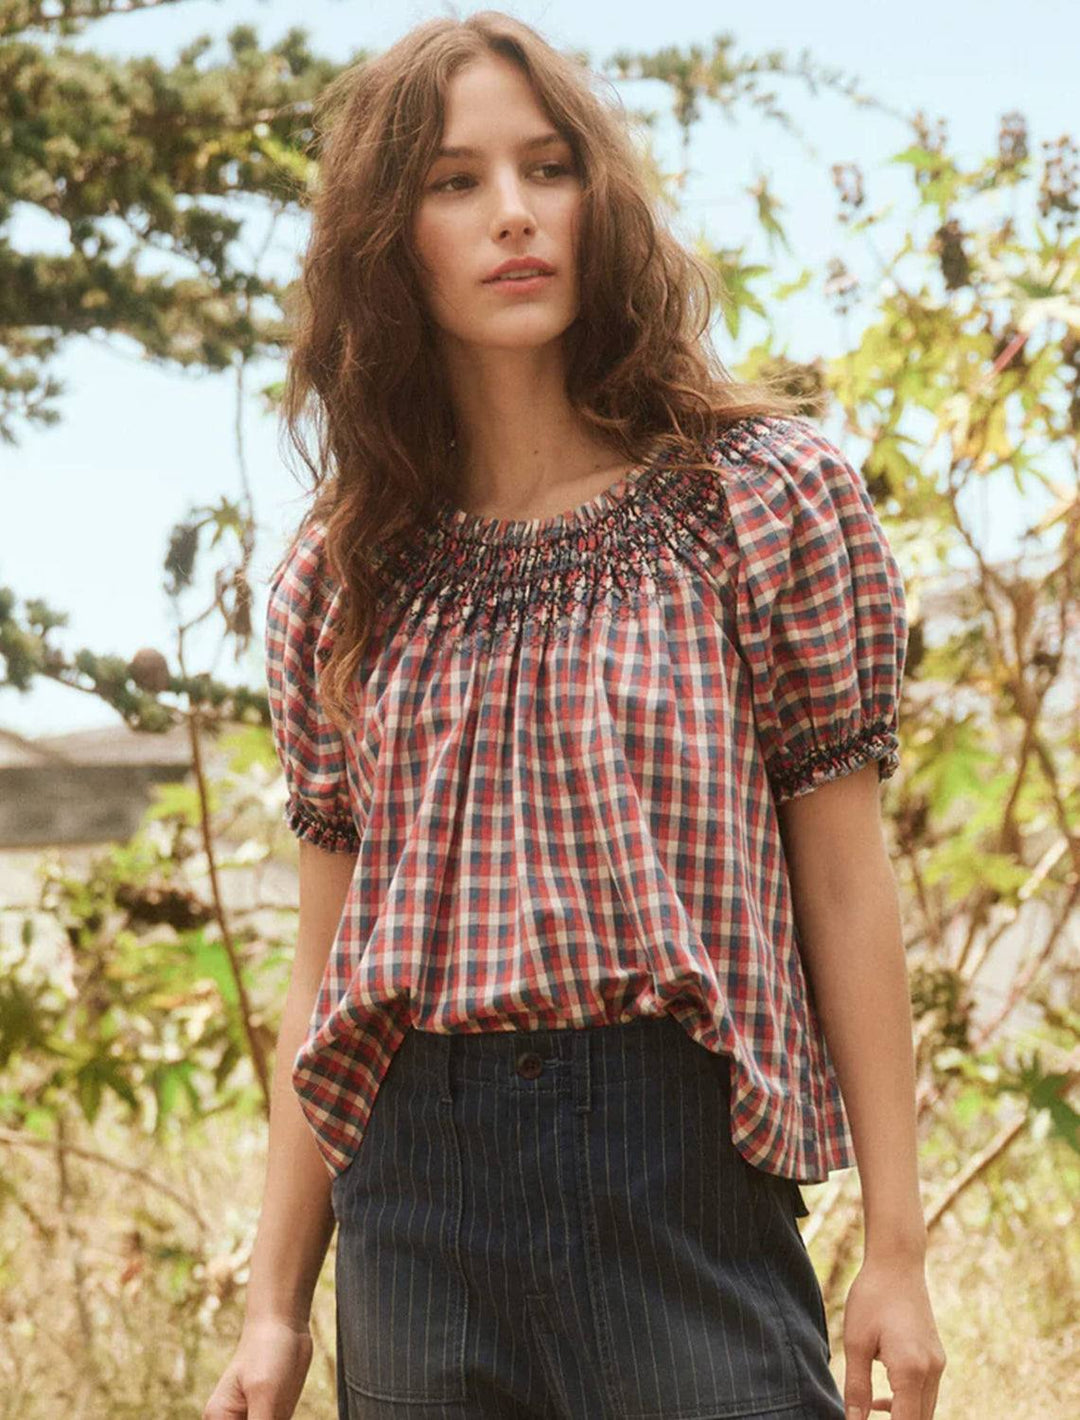 Model wearing The Great's the fair top in picnic plaid.